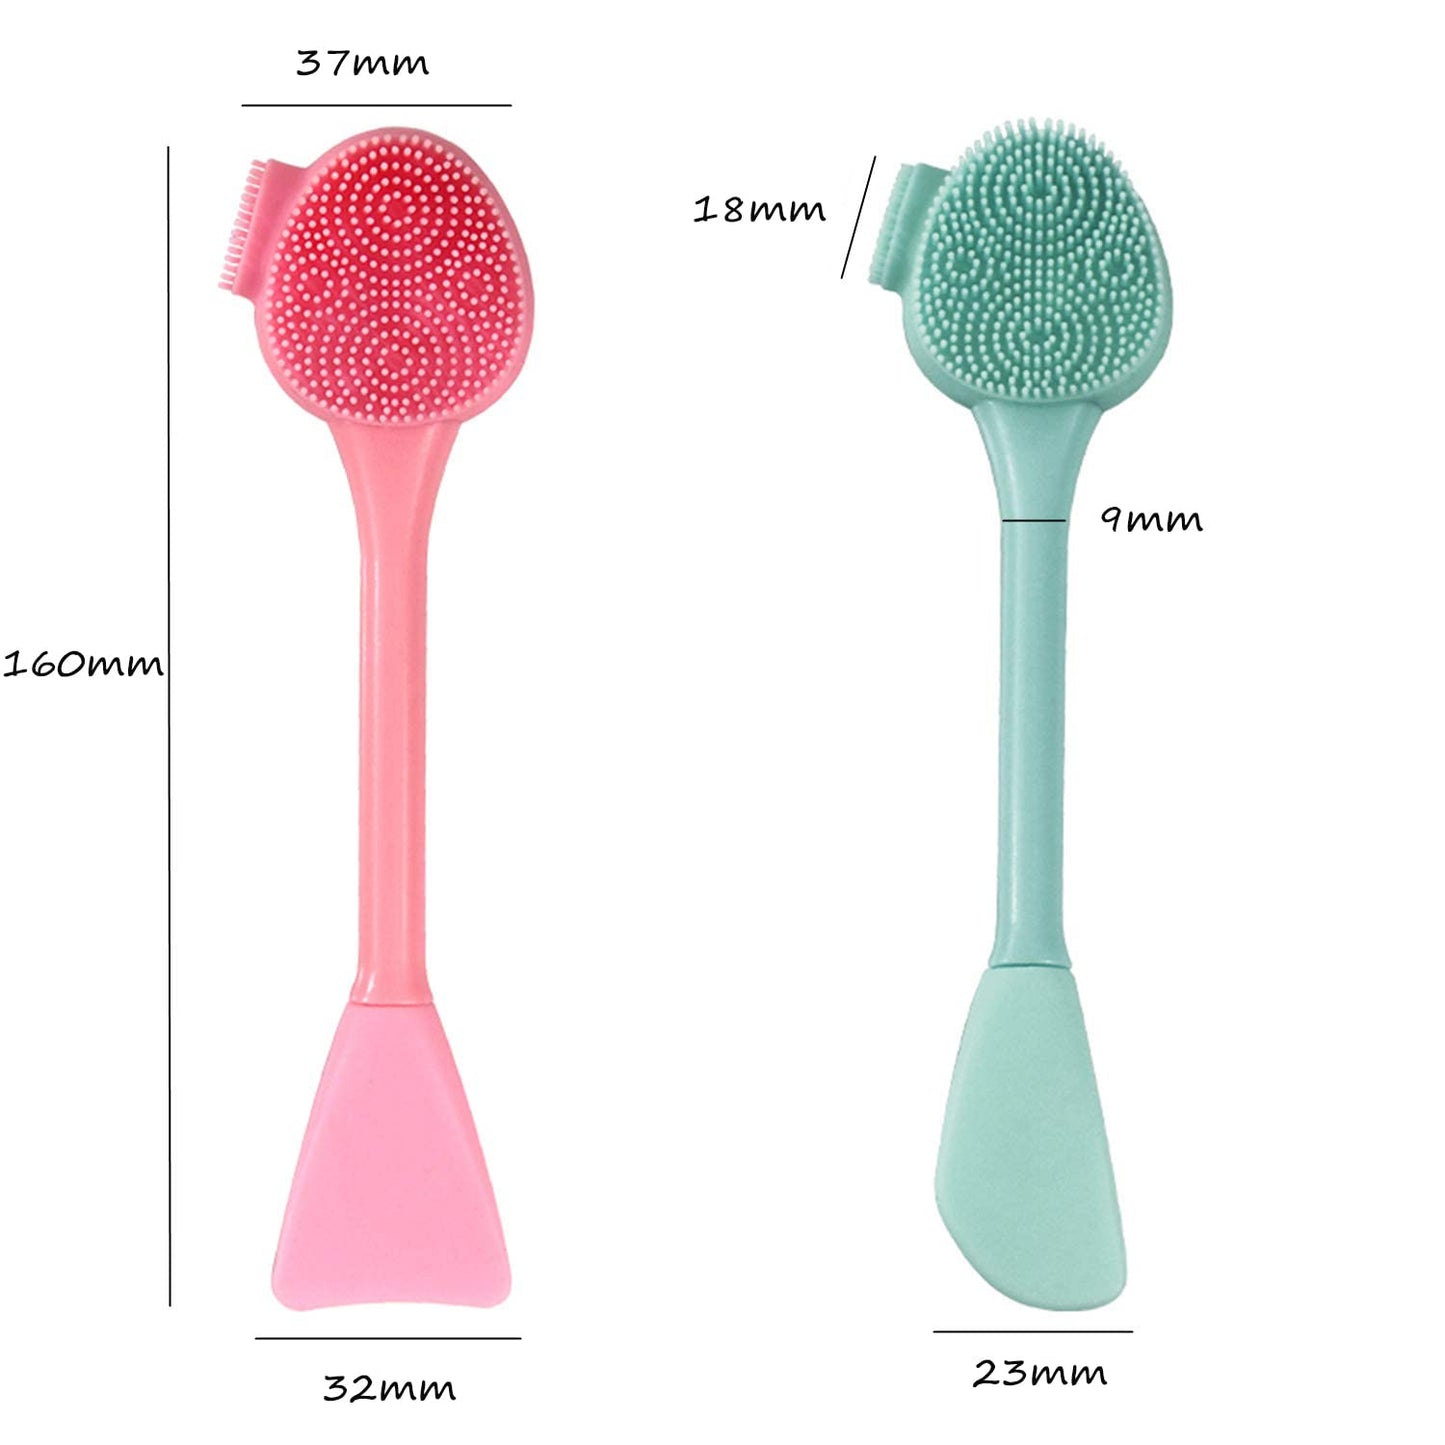 Face Cleaning Brush, 2PCS Double Head Manual Facial Cleansing Brush Face Mask Brush Applicator for Gentle Exfoliating, Deep Cleansing, Makeup Removal, Massaging(Pink, Green)